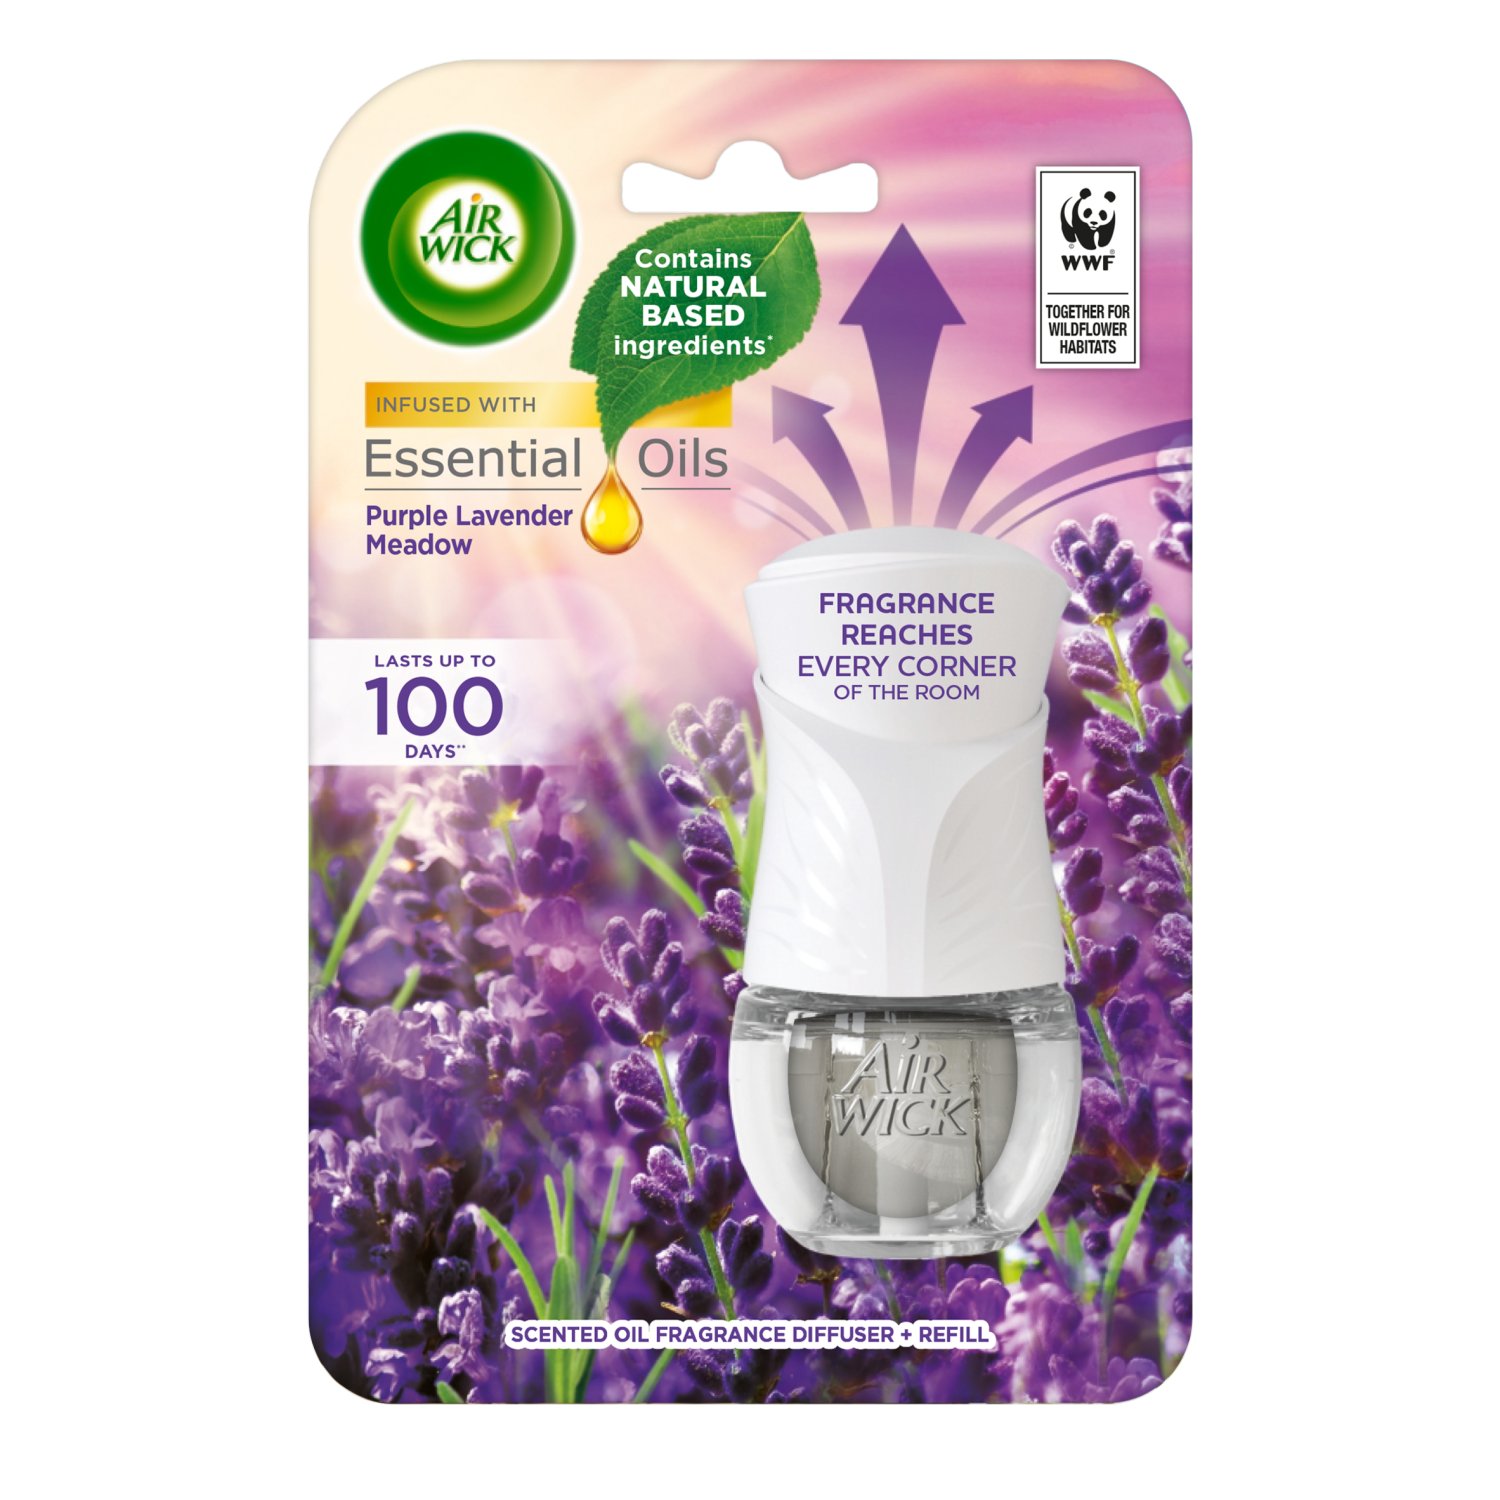 Our Air Wick plug in air fresheners contain natural-based ingredients and are infused with Natural Essential Oils. Our fragrances beautifully blend with your home décor to fill  your living room with long lasting fragrance for up to 100 days based on lowest setting. Air Wick is a proud partner of WWF UK, working to restore UK wildflower habitats. Air Wick is raising £400,000 per year for WWF-UK for wildflowers conservation projects (WWF-UK Trading Ltd pays all taxable profits to WWF-UK charity registered in England & Wales 1081247, Scotland SC039593). Air Freshener. Airwick.